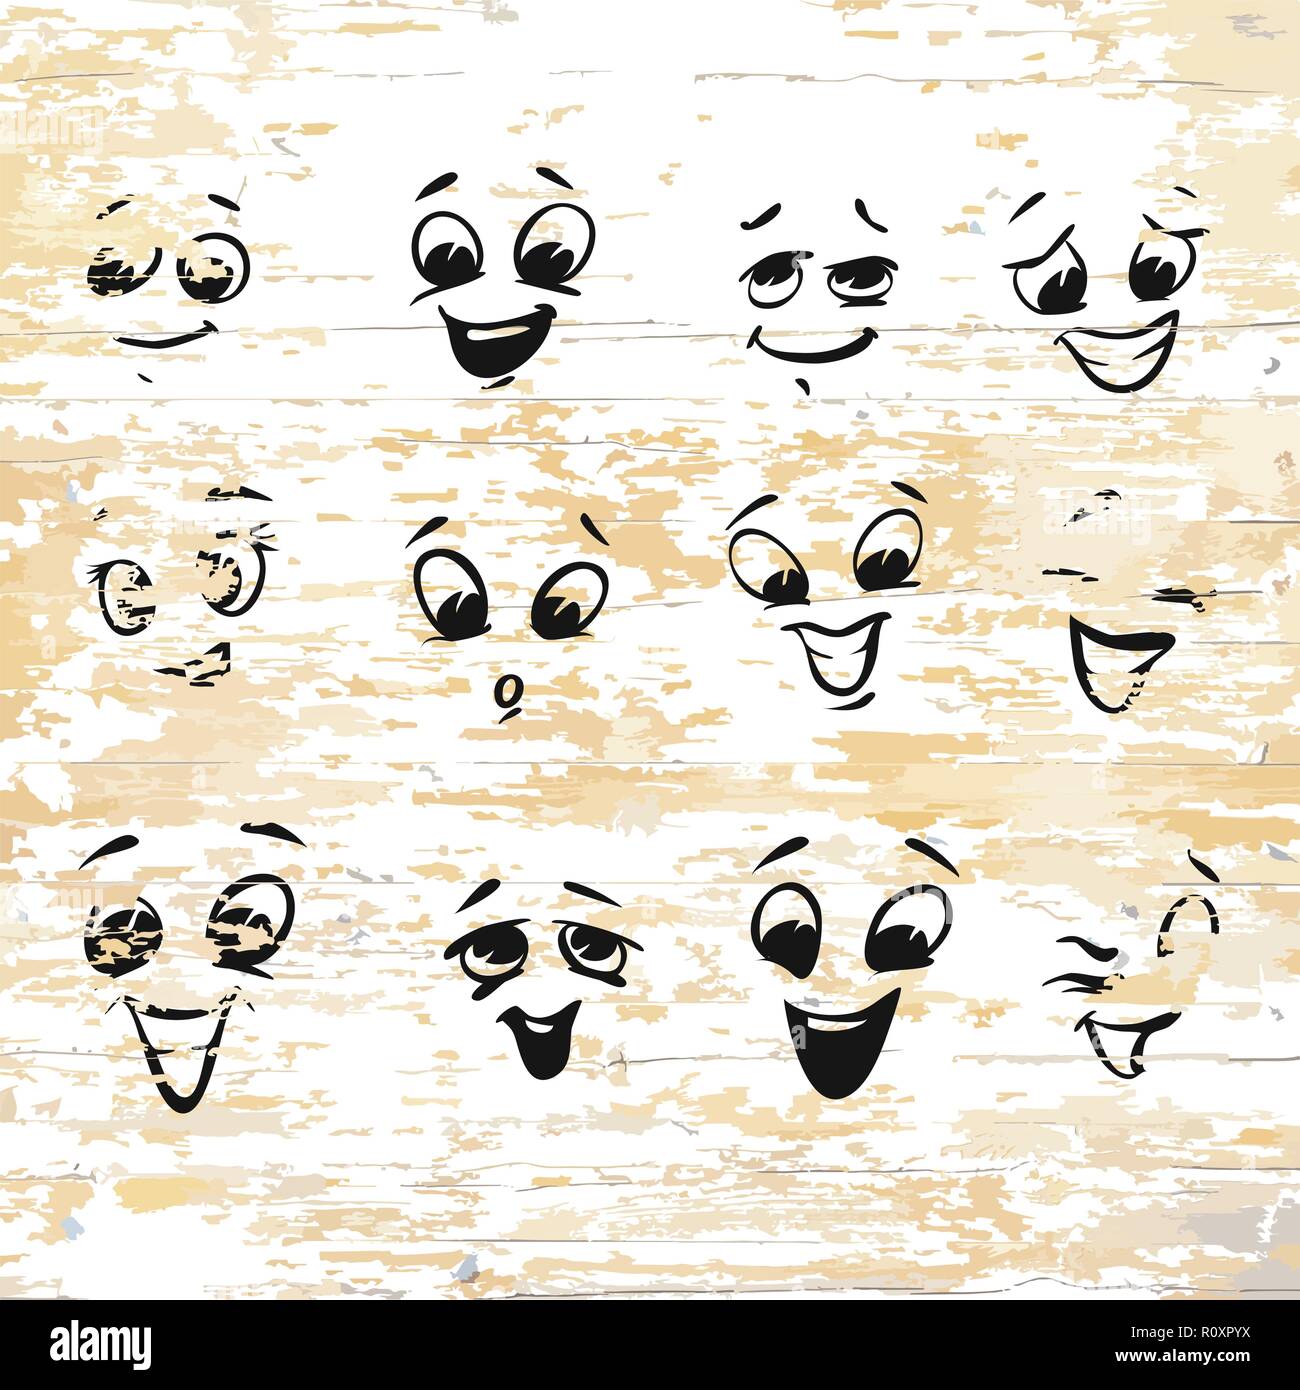 Laughing icons drawings on wooden background. Vector illustration drawn by hand. Stock Vector